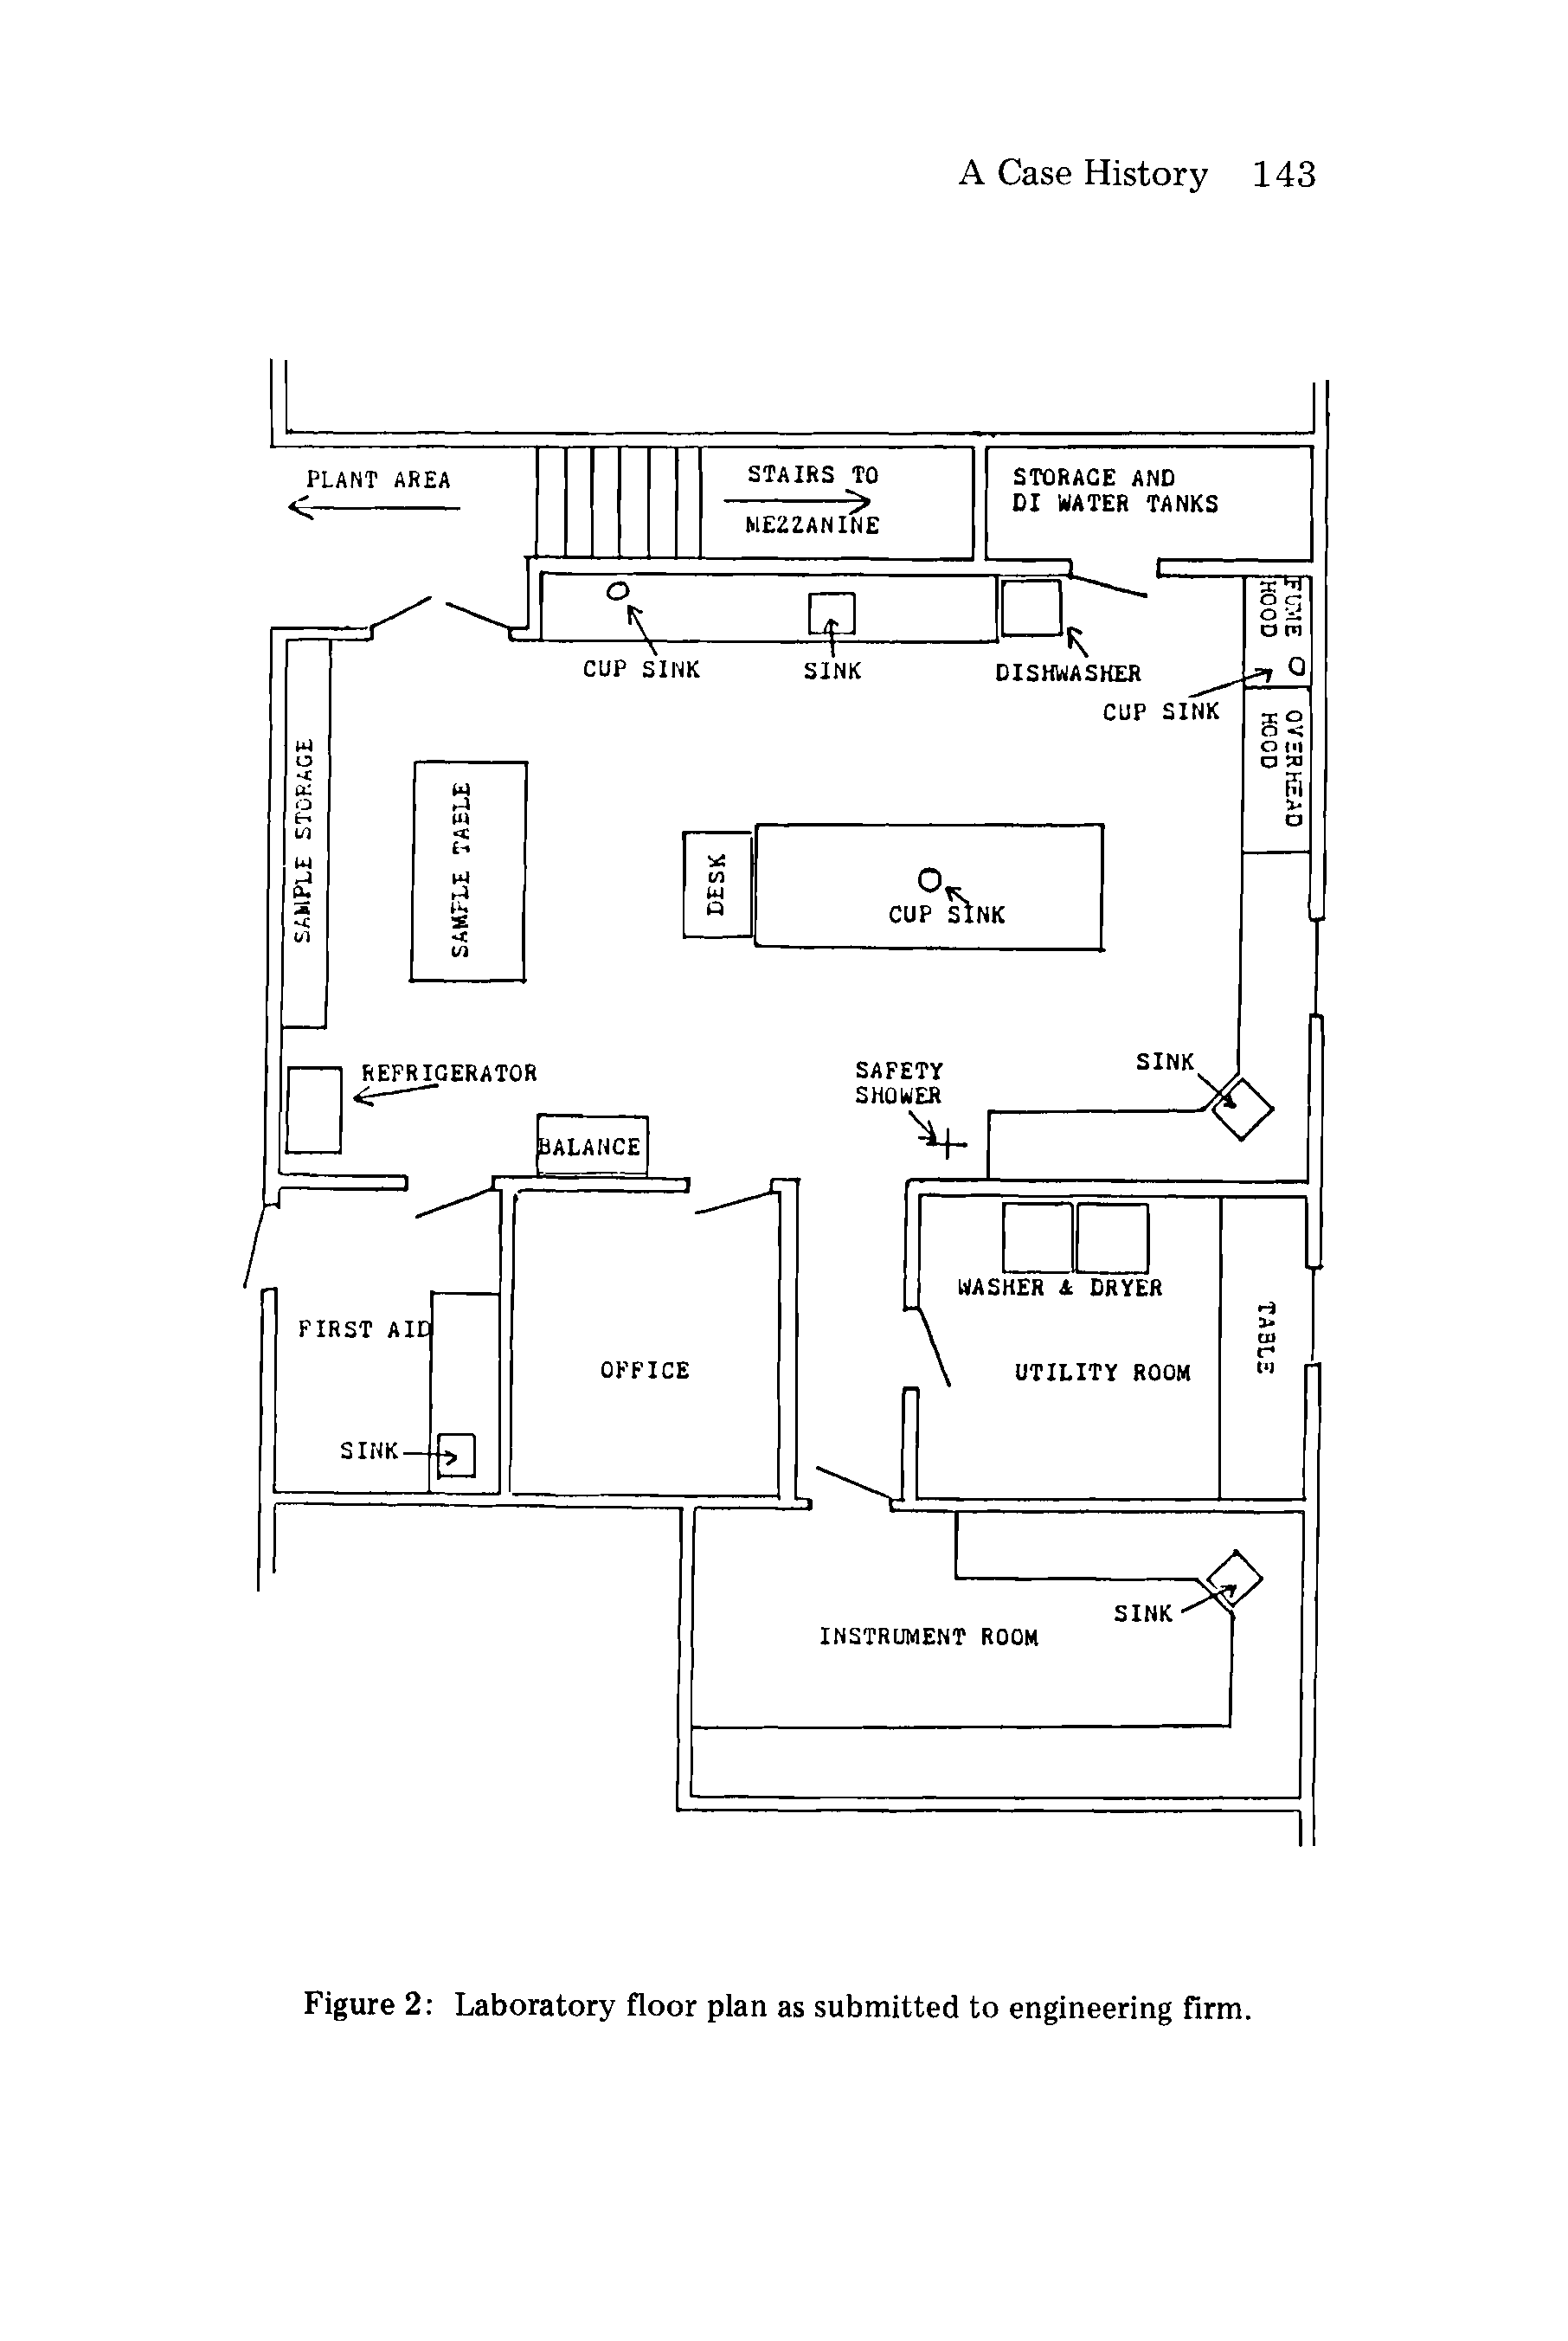 Figure 2 Laboratory floor plan as submitted to engineering firm.